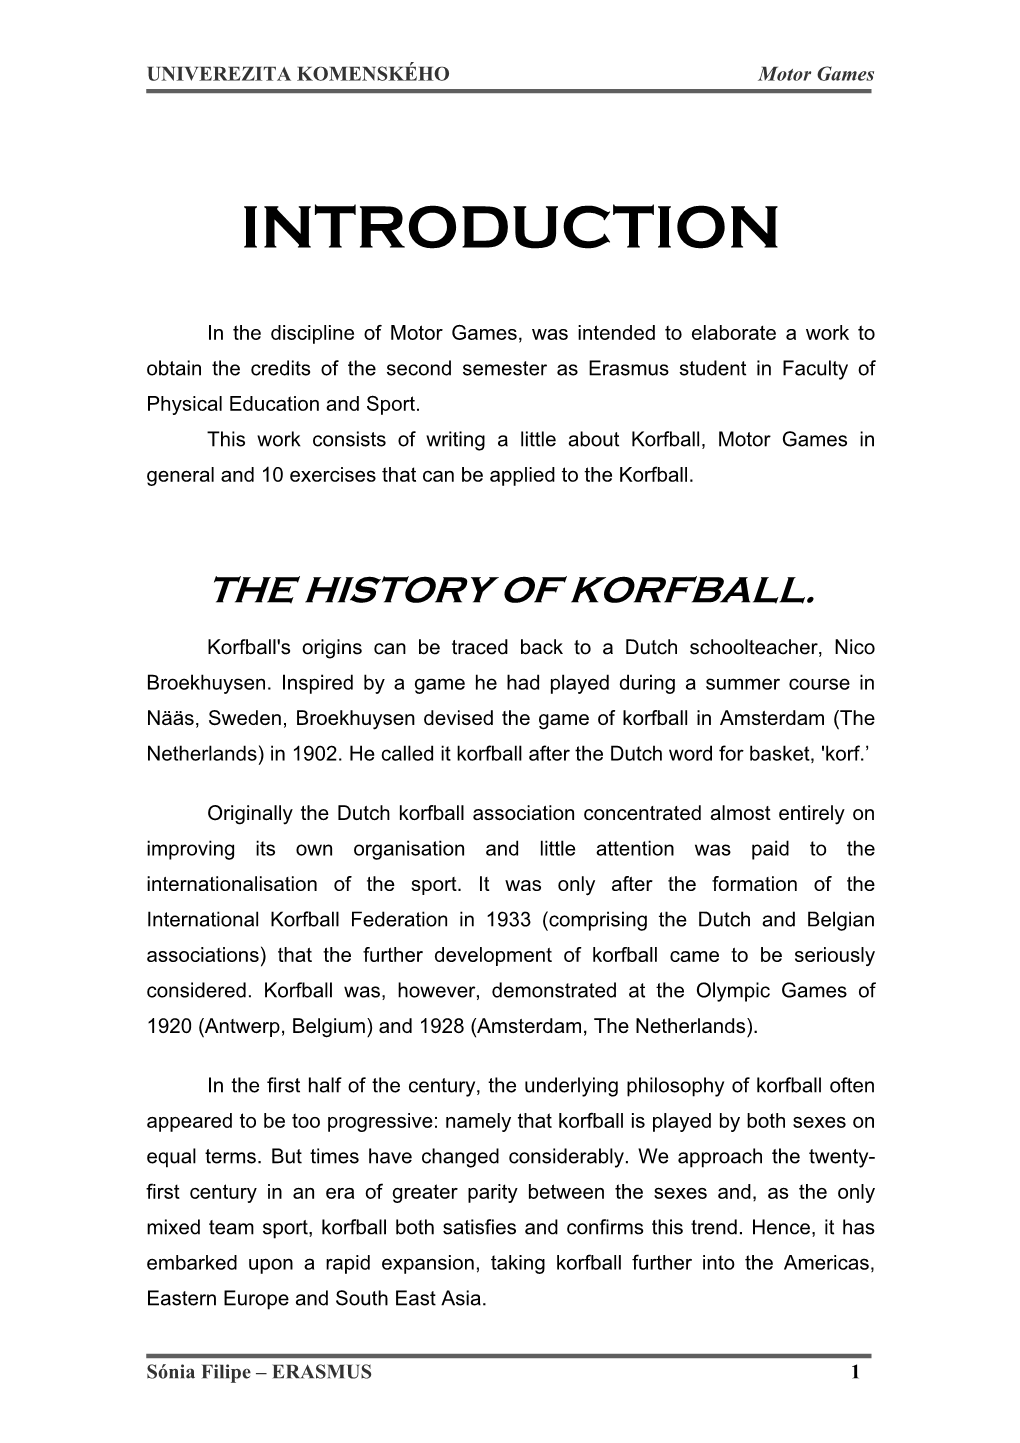 Korfball, Motor Games in General and 10 Exercises That Can Be Applied to the Korfball